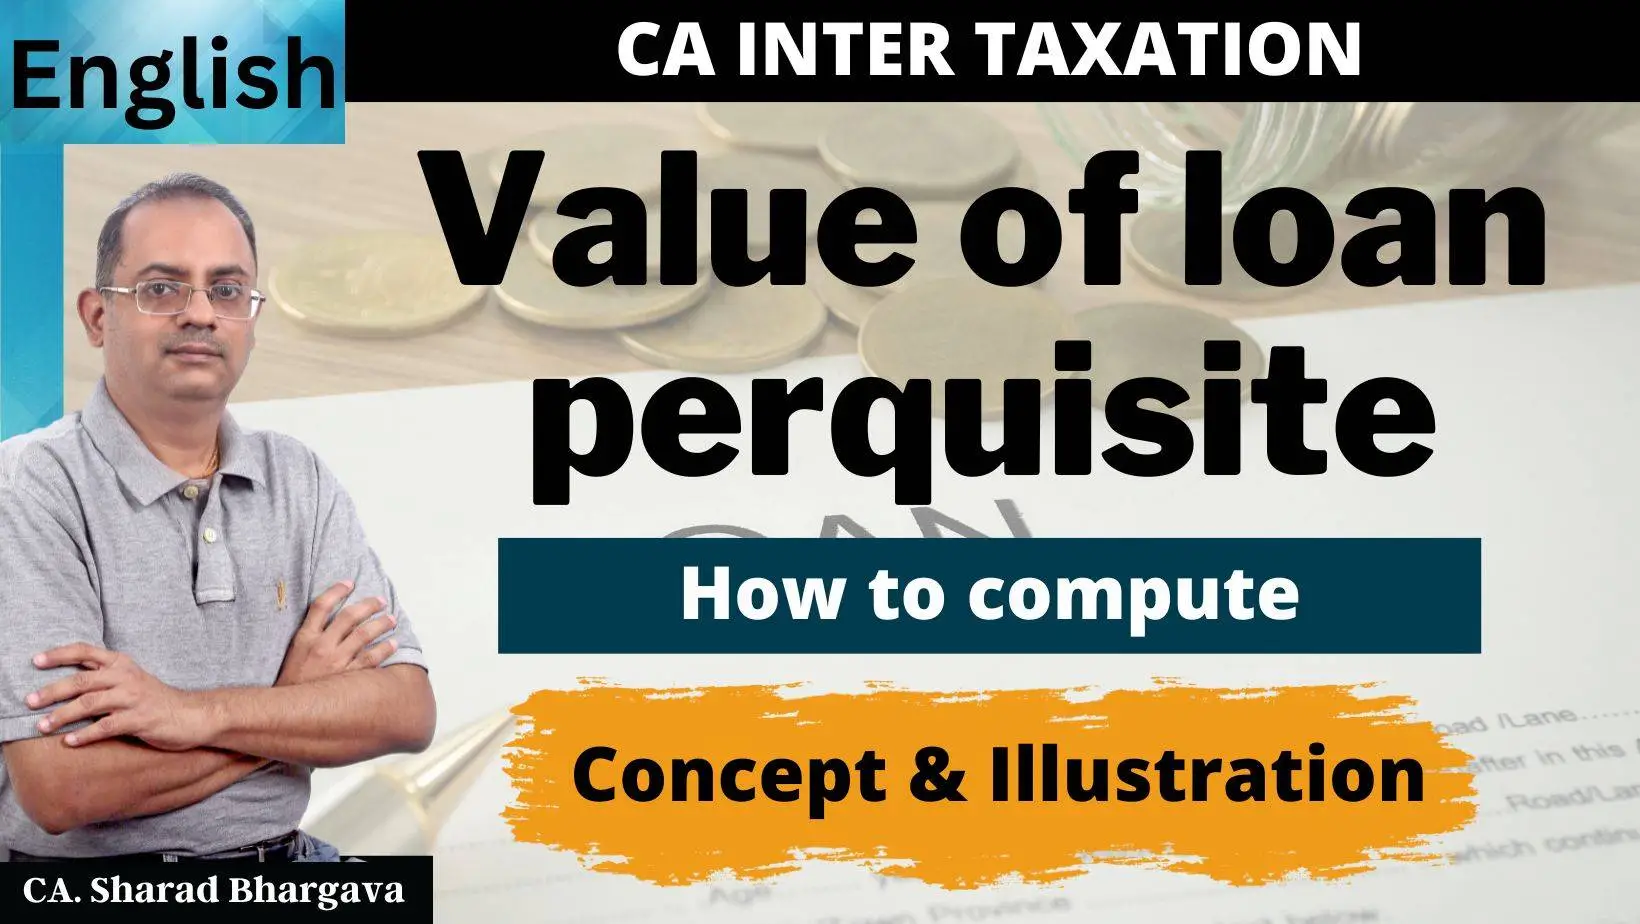 (English) How to compute perquisite value of loan given to employee / CA. Sharad Bhargava